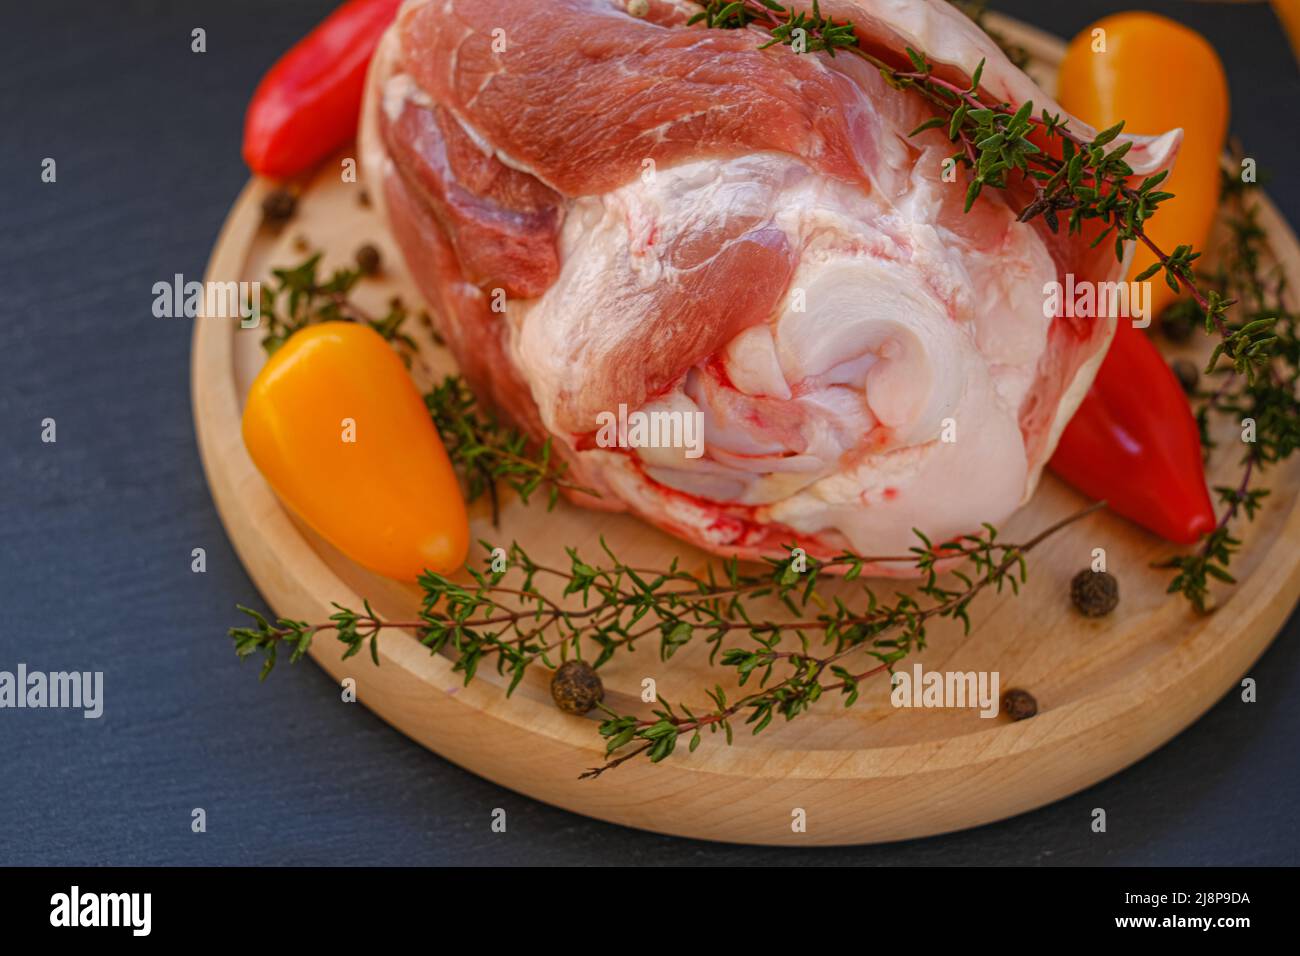 meat on the bone, sweet fresh pepper and thyme herb on a wooden board on a black slate background.Meat products.Farm organic bio meat. Stock Photo